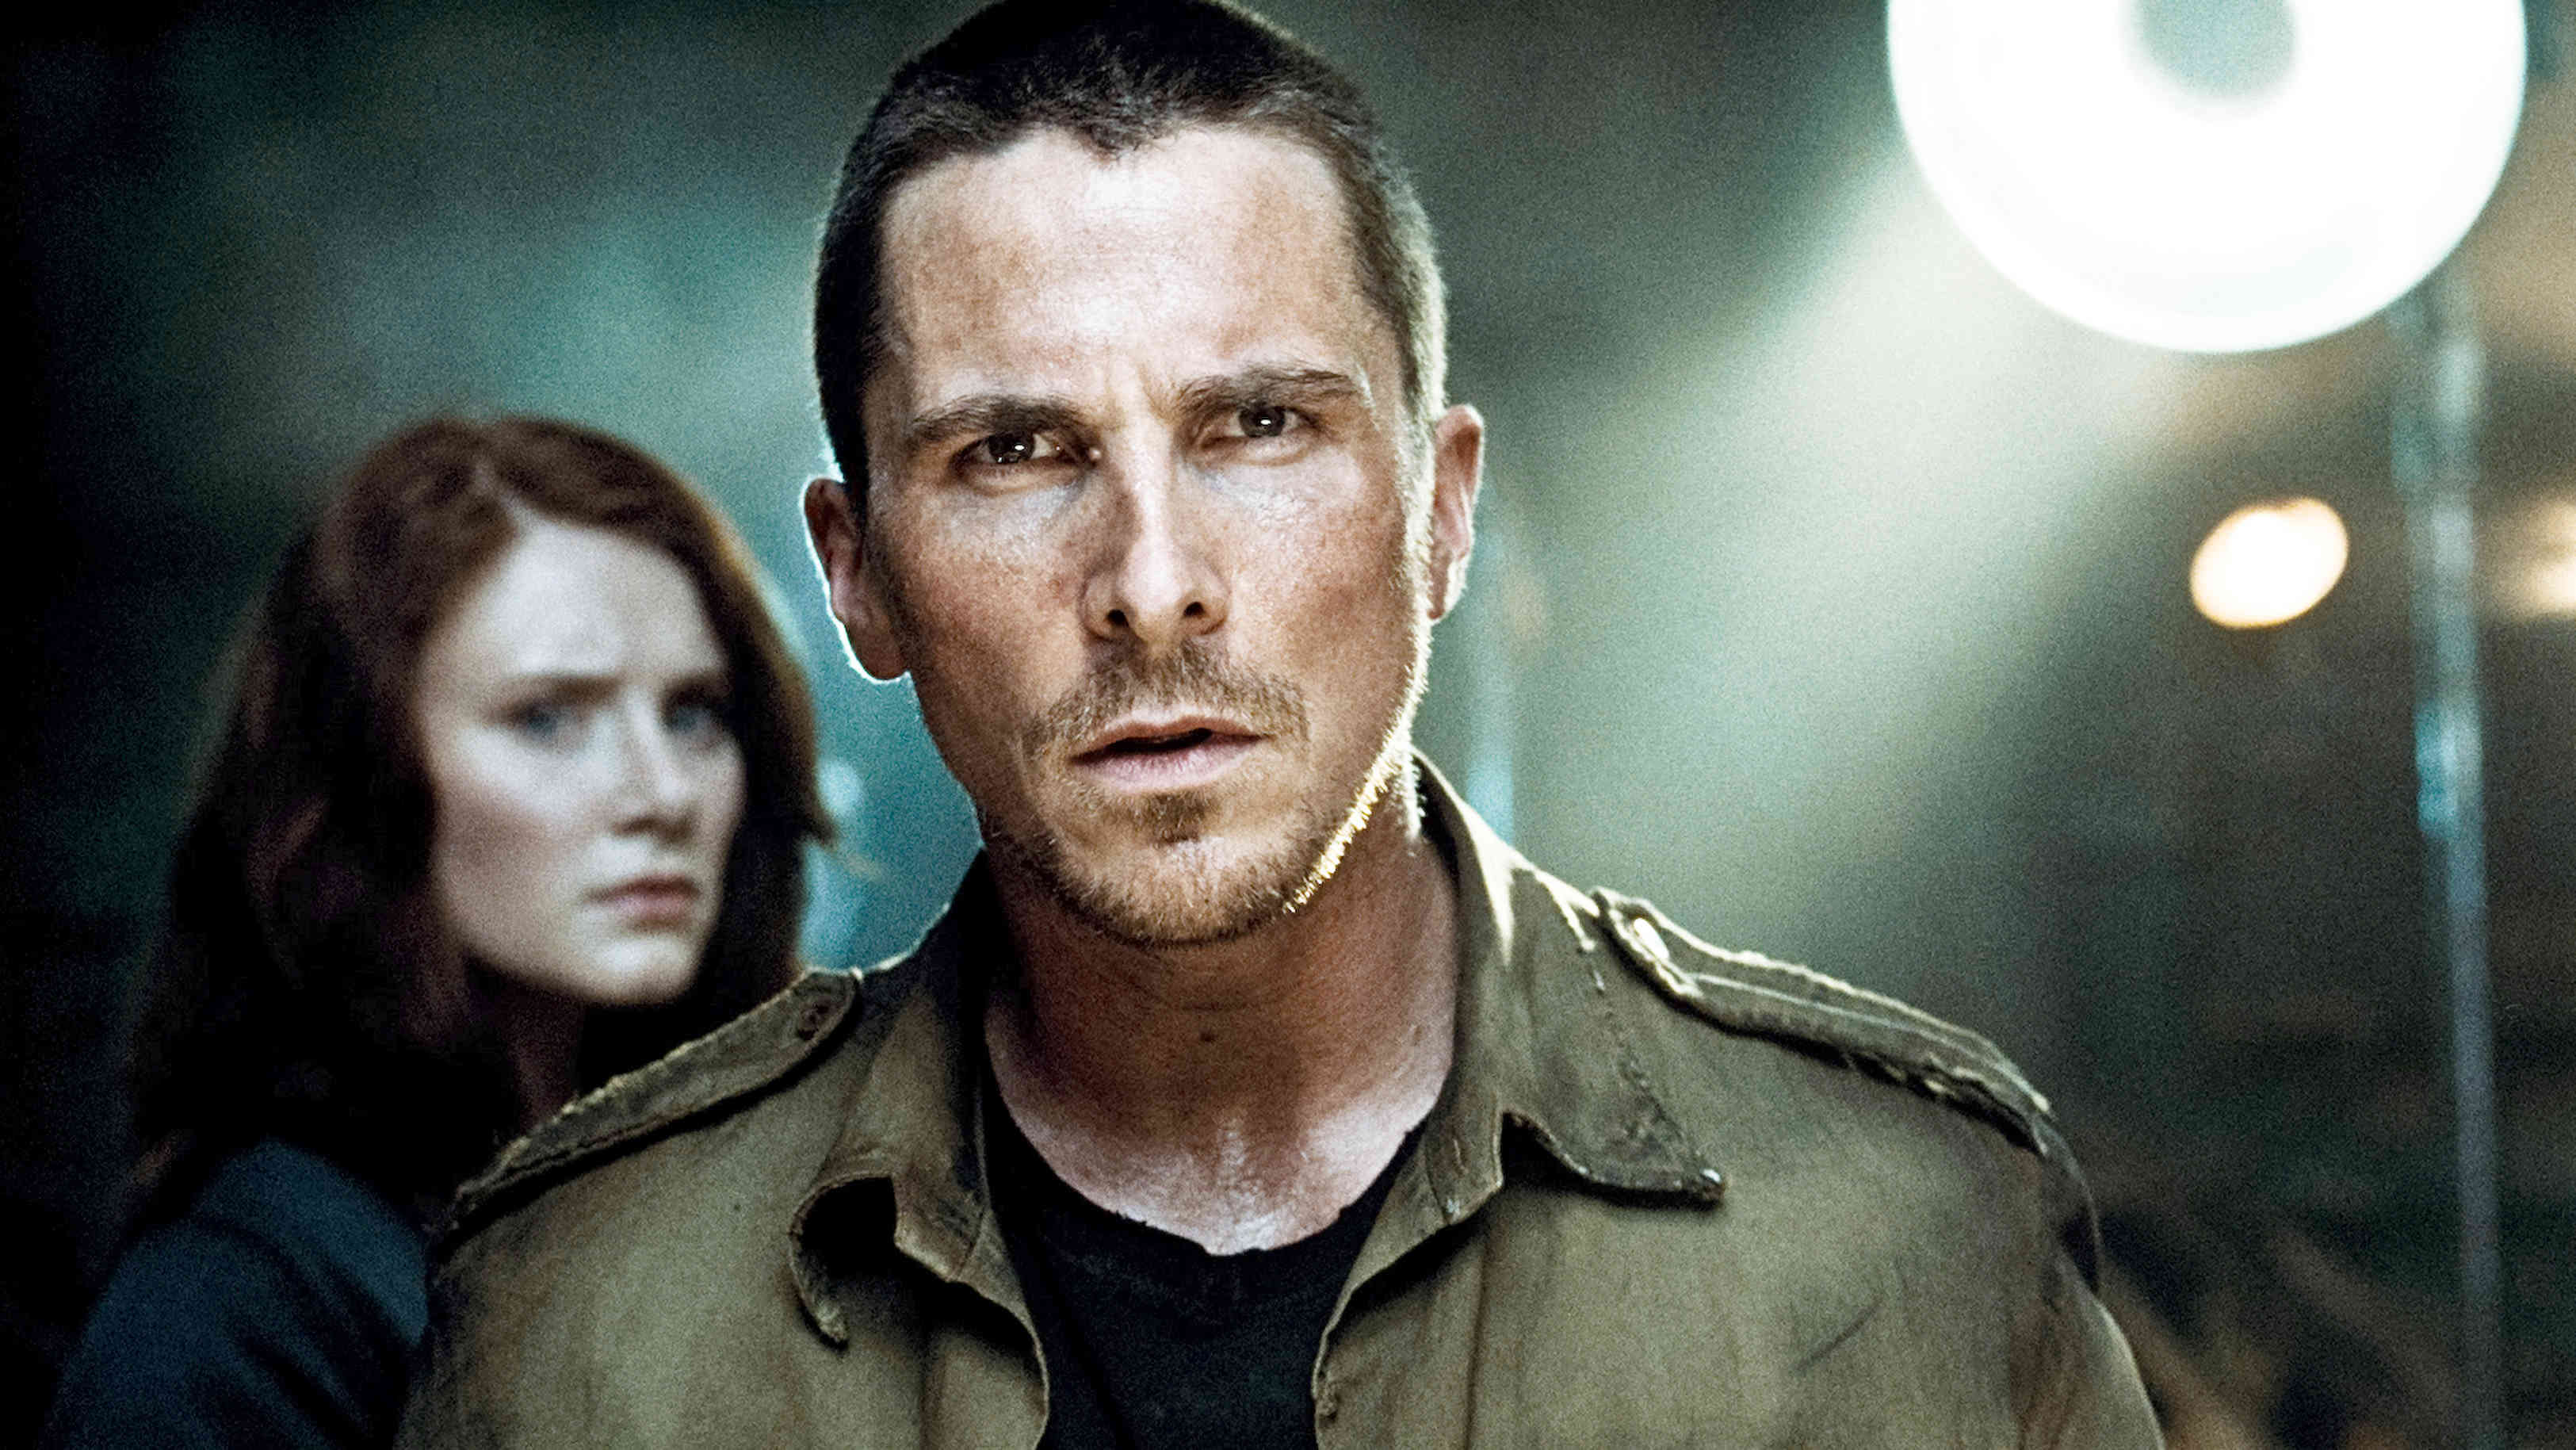 Bryce Dallas Howard stars as Kate Connor and Christian Bale stars as John Connor in Warner Bros. Pictures' Terminator Salvation (2009)